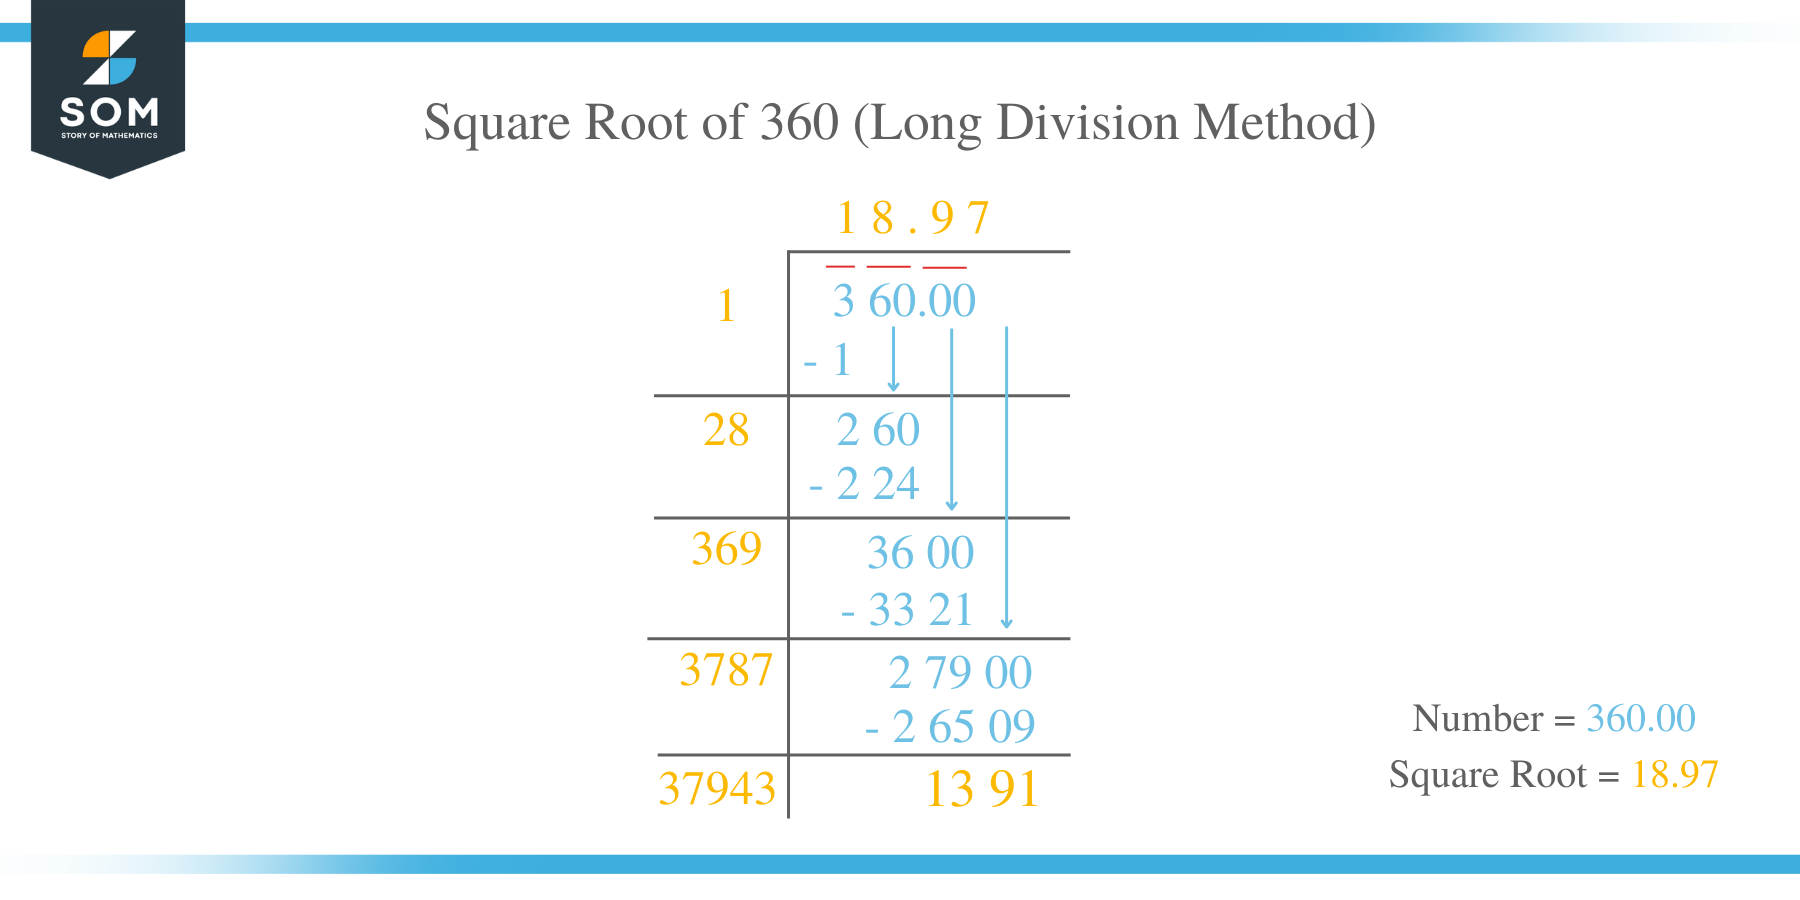 Square Root of 360 by Long Division Method